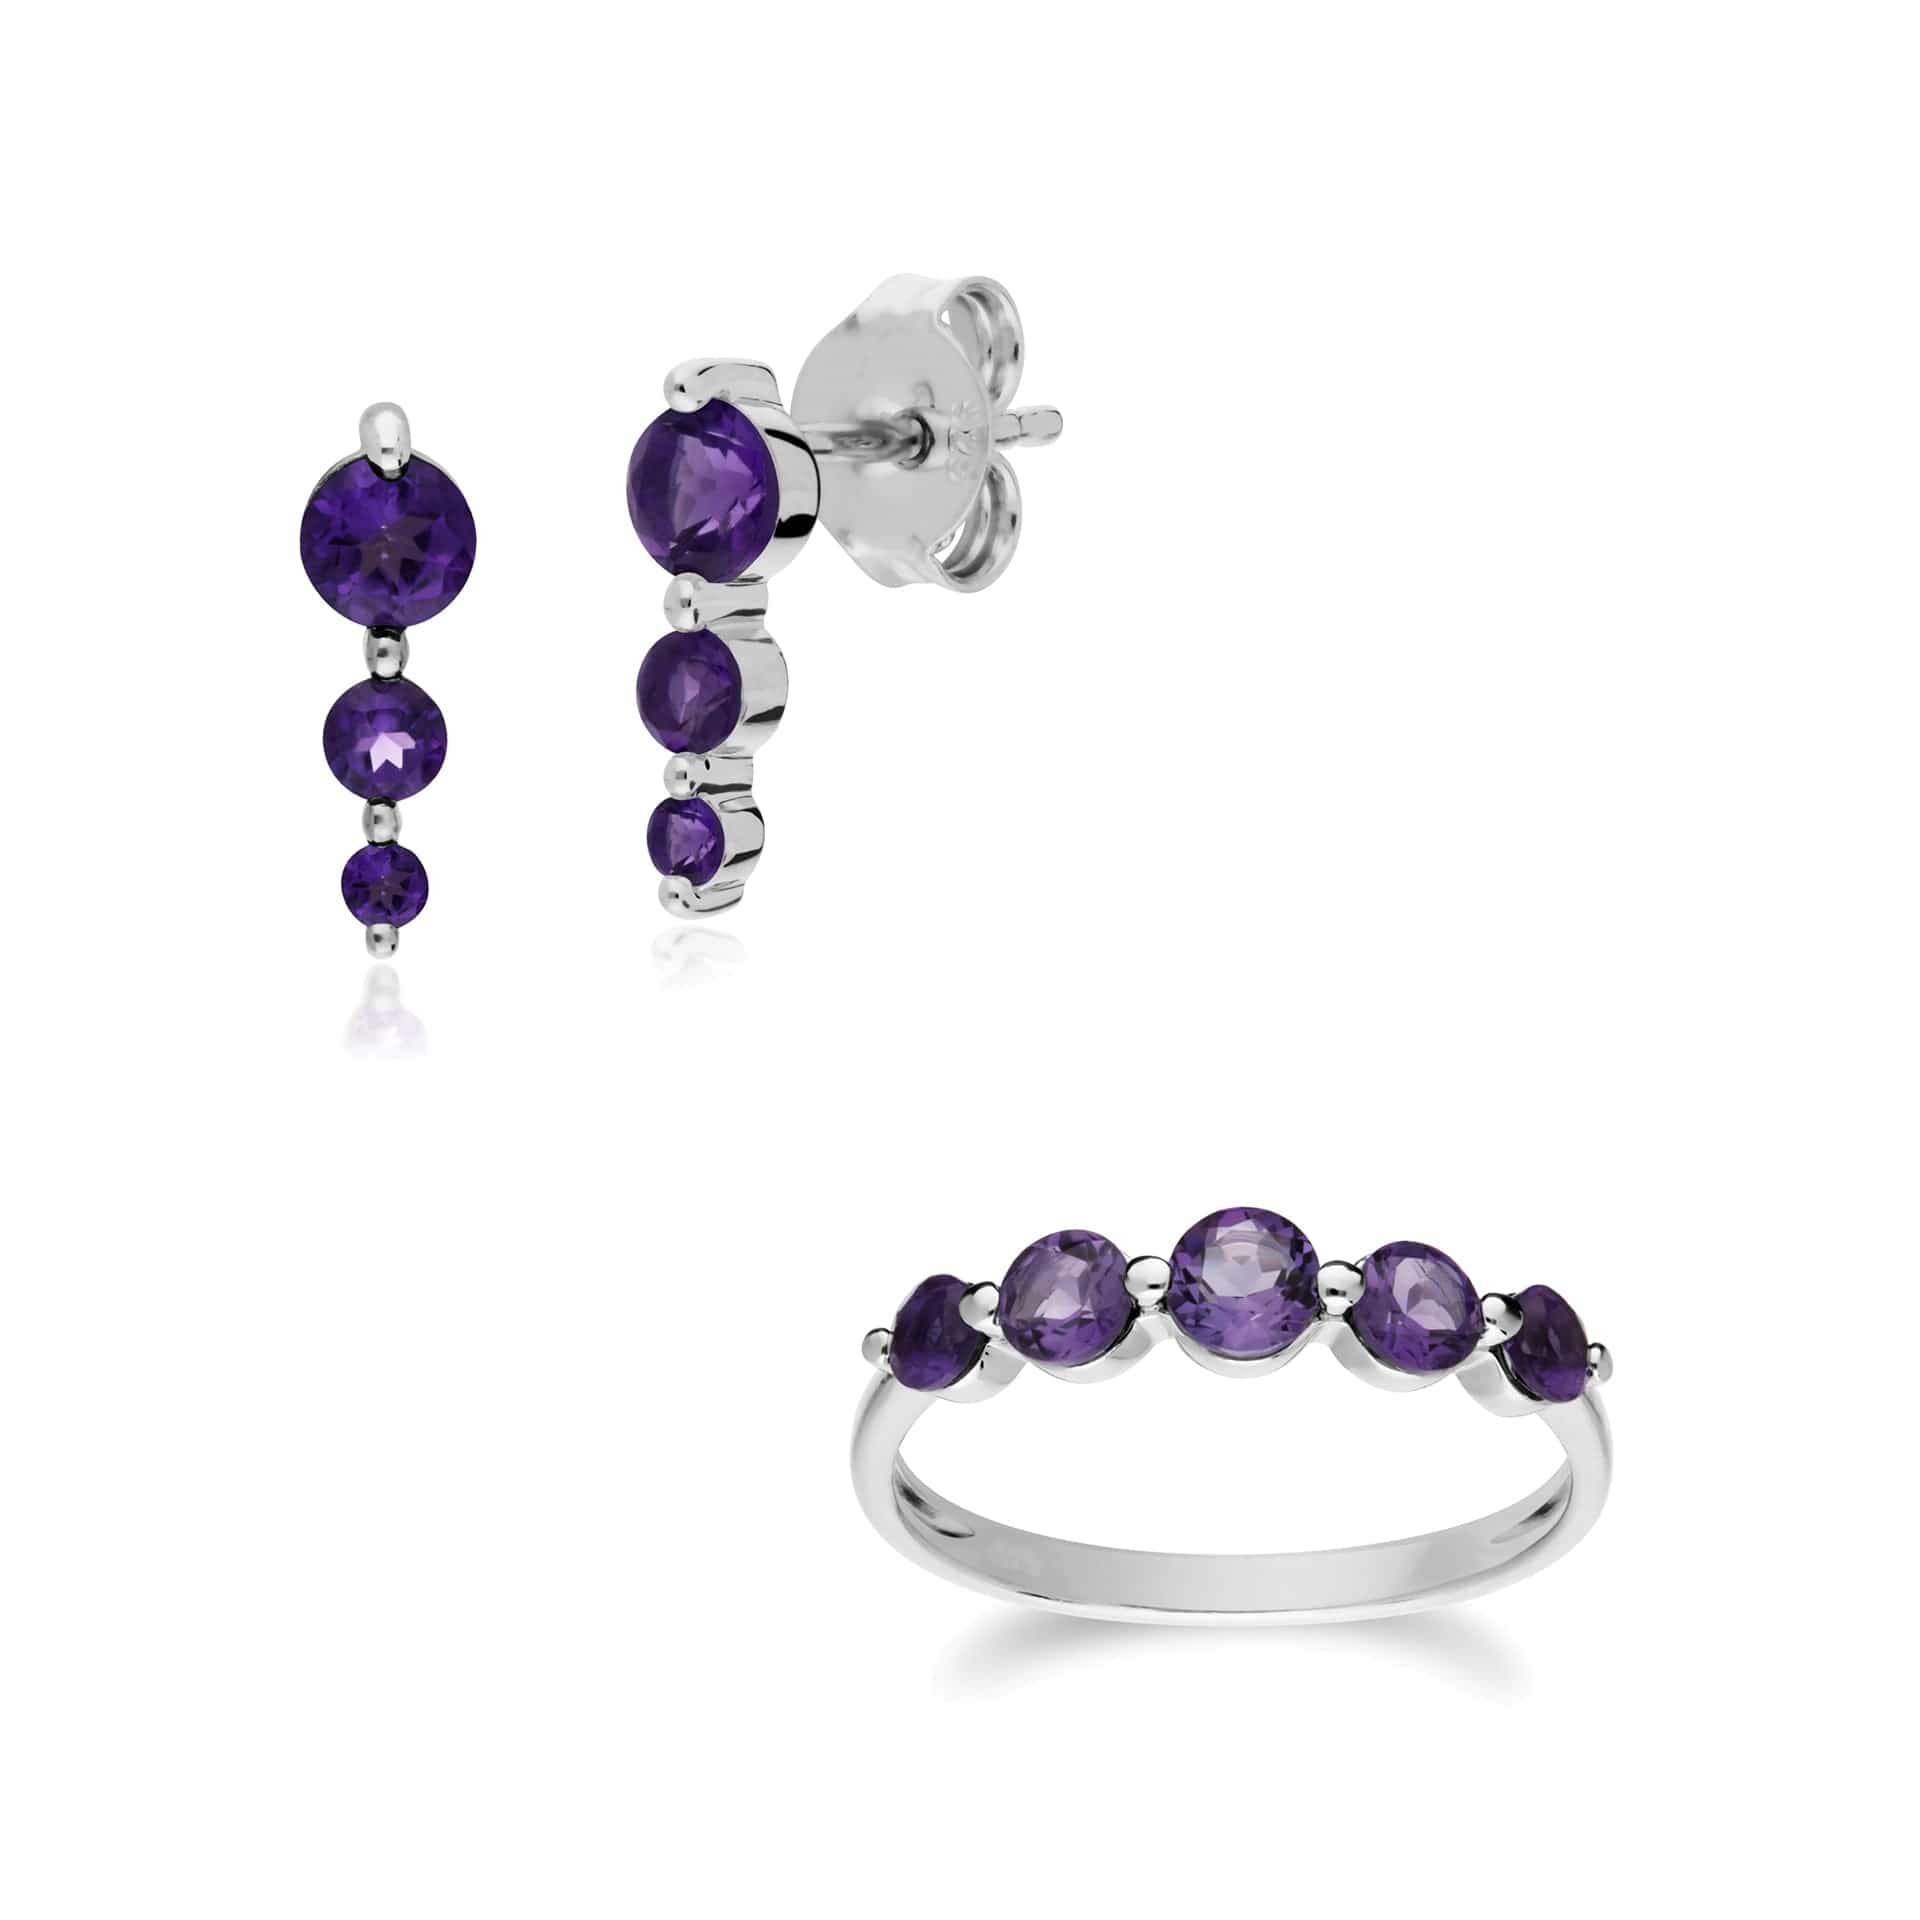 270E025503925-270R055903925 Classic Round Amethyst Three Stone Gradient Earrings & Five Stone Ring Set in 925 Sterling Silver 1